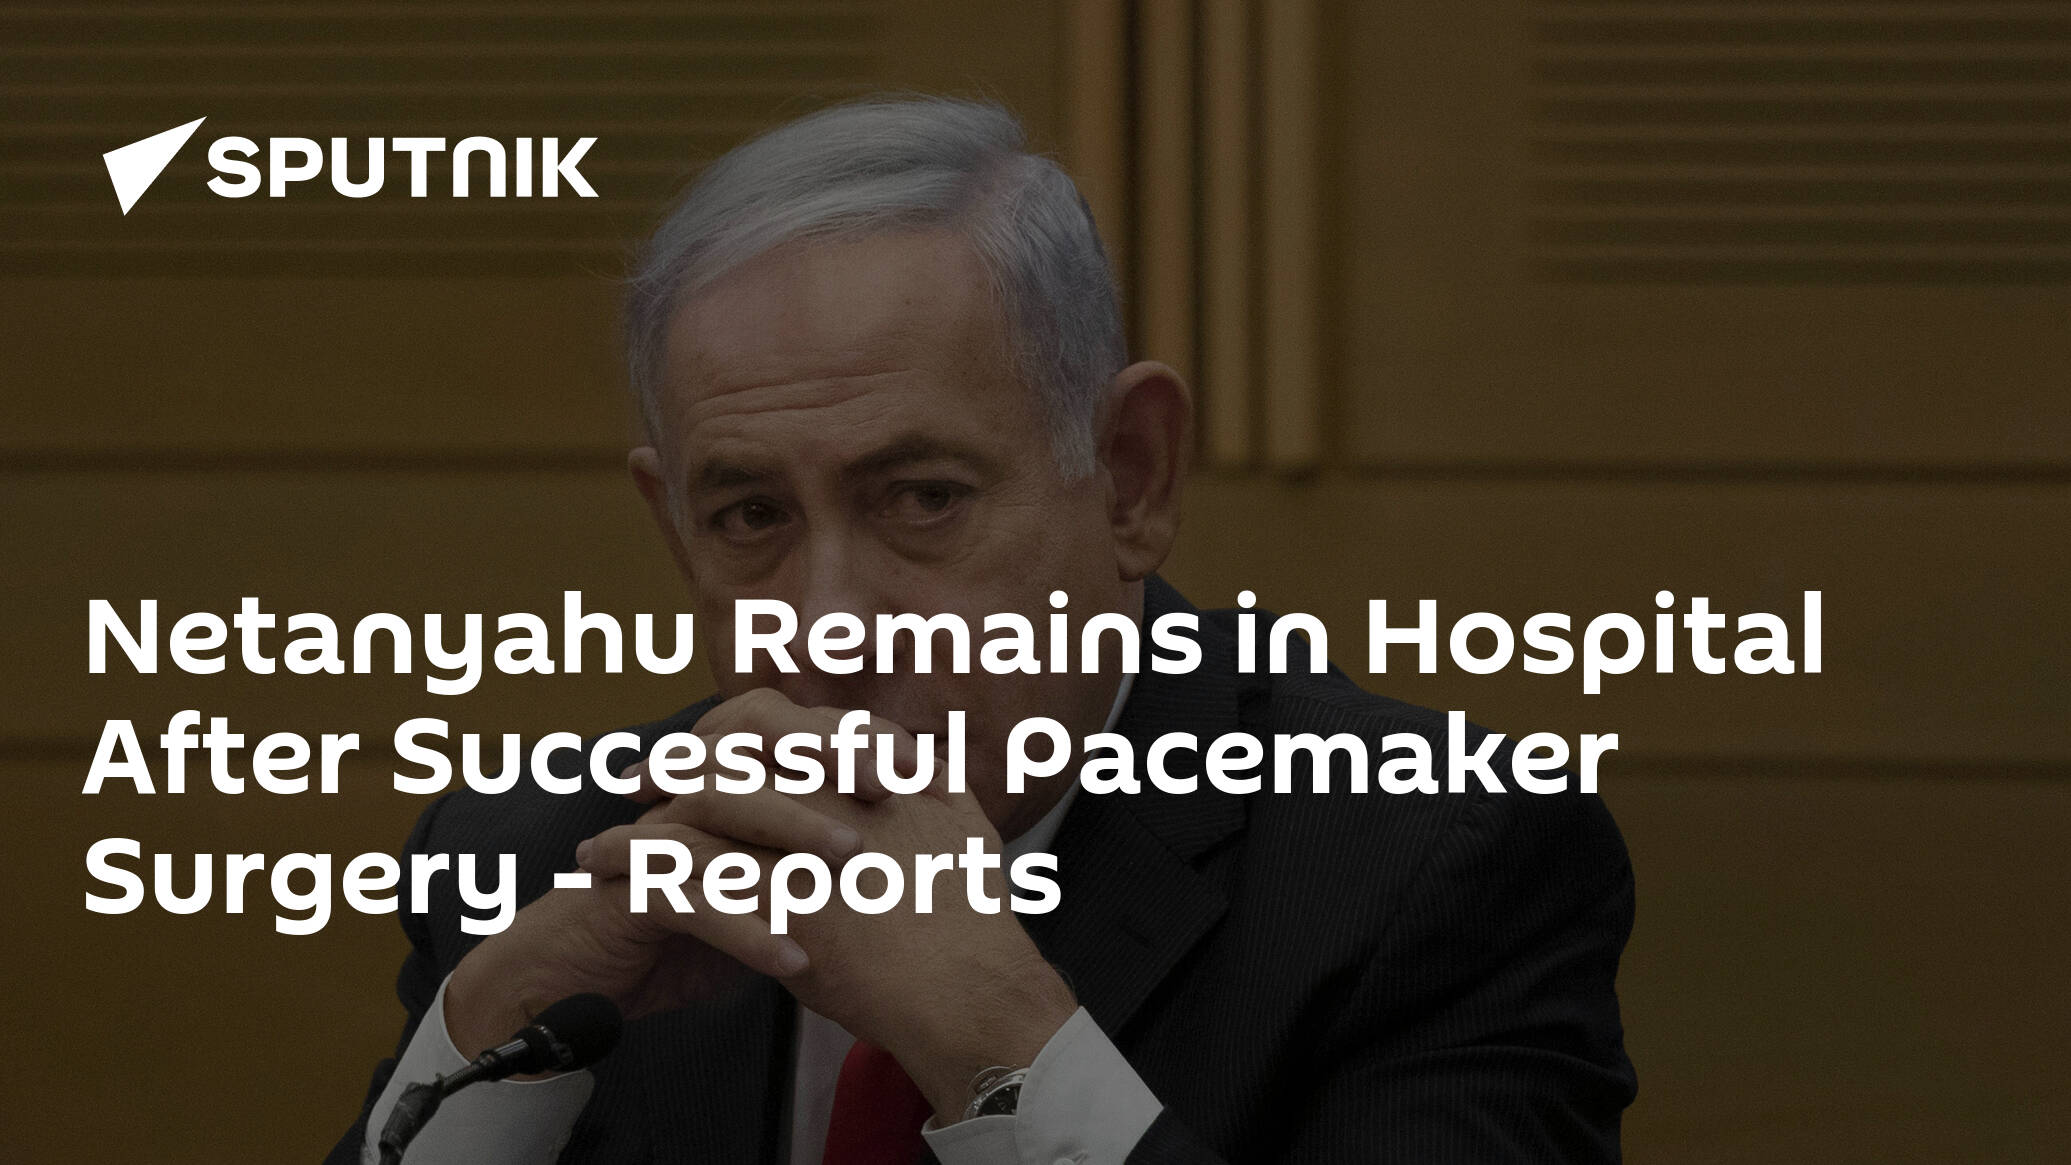 Netanyahu Remains in Hospital After Successful Pacemaker Surgery - Reports